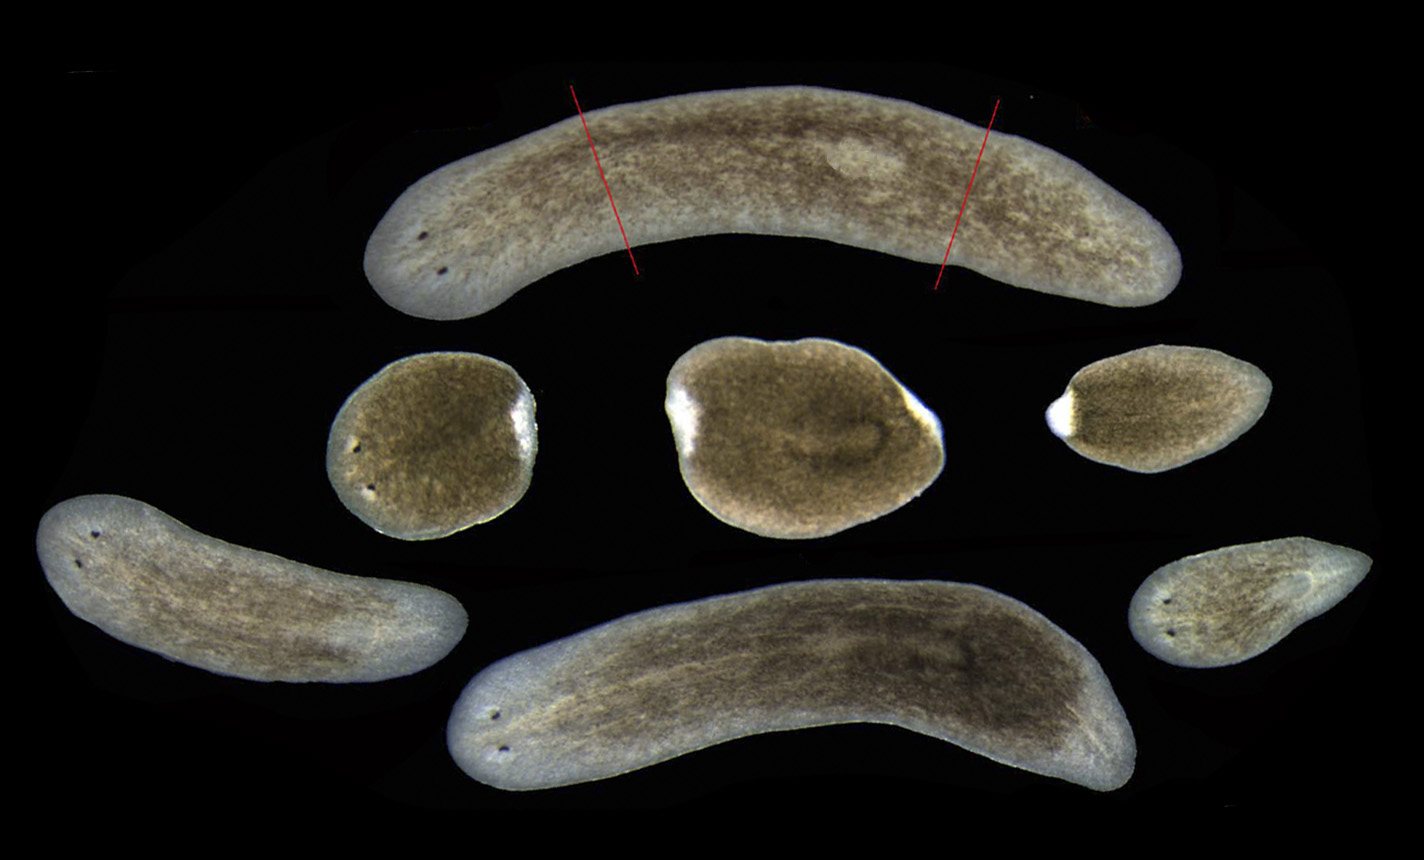 These flatworms are capable of regenerating any part of their bodies, even their heads. Foto: Teresa Adell.